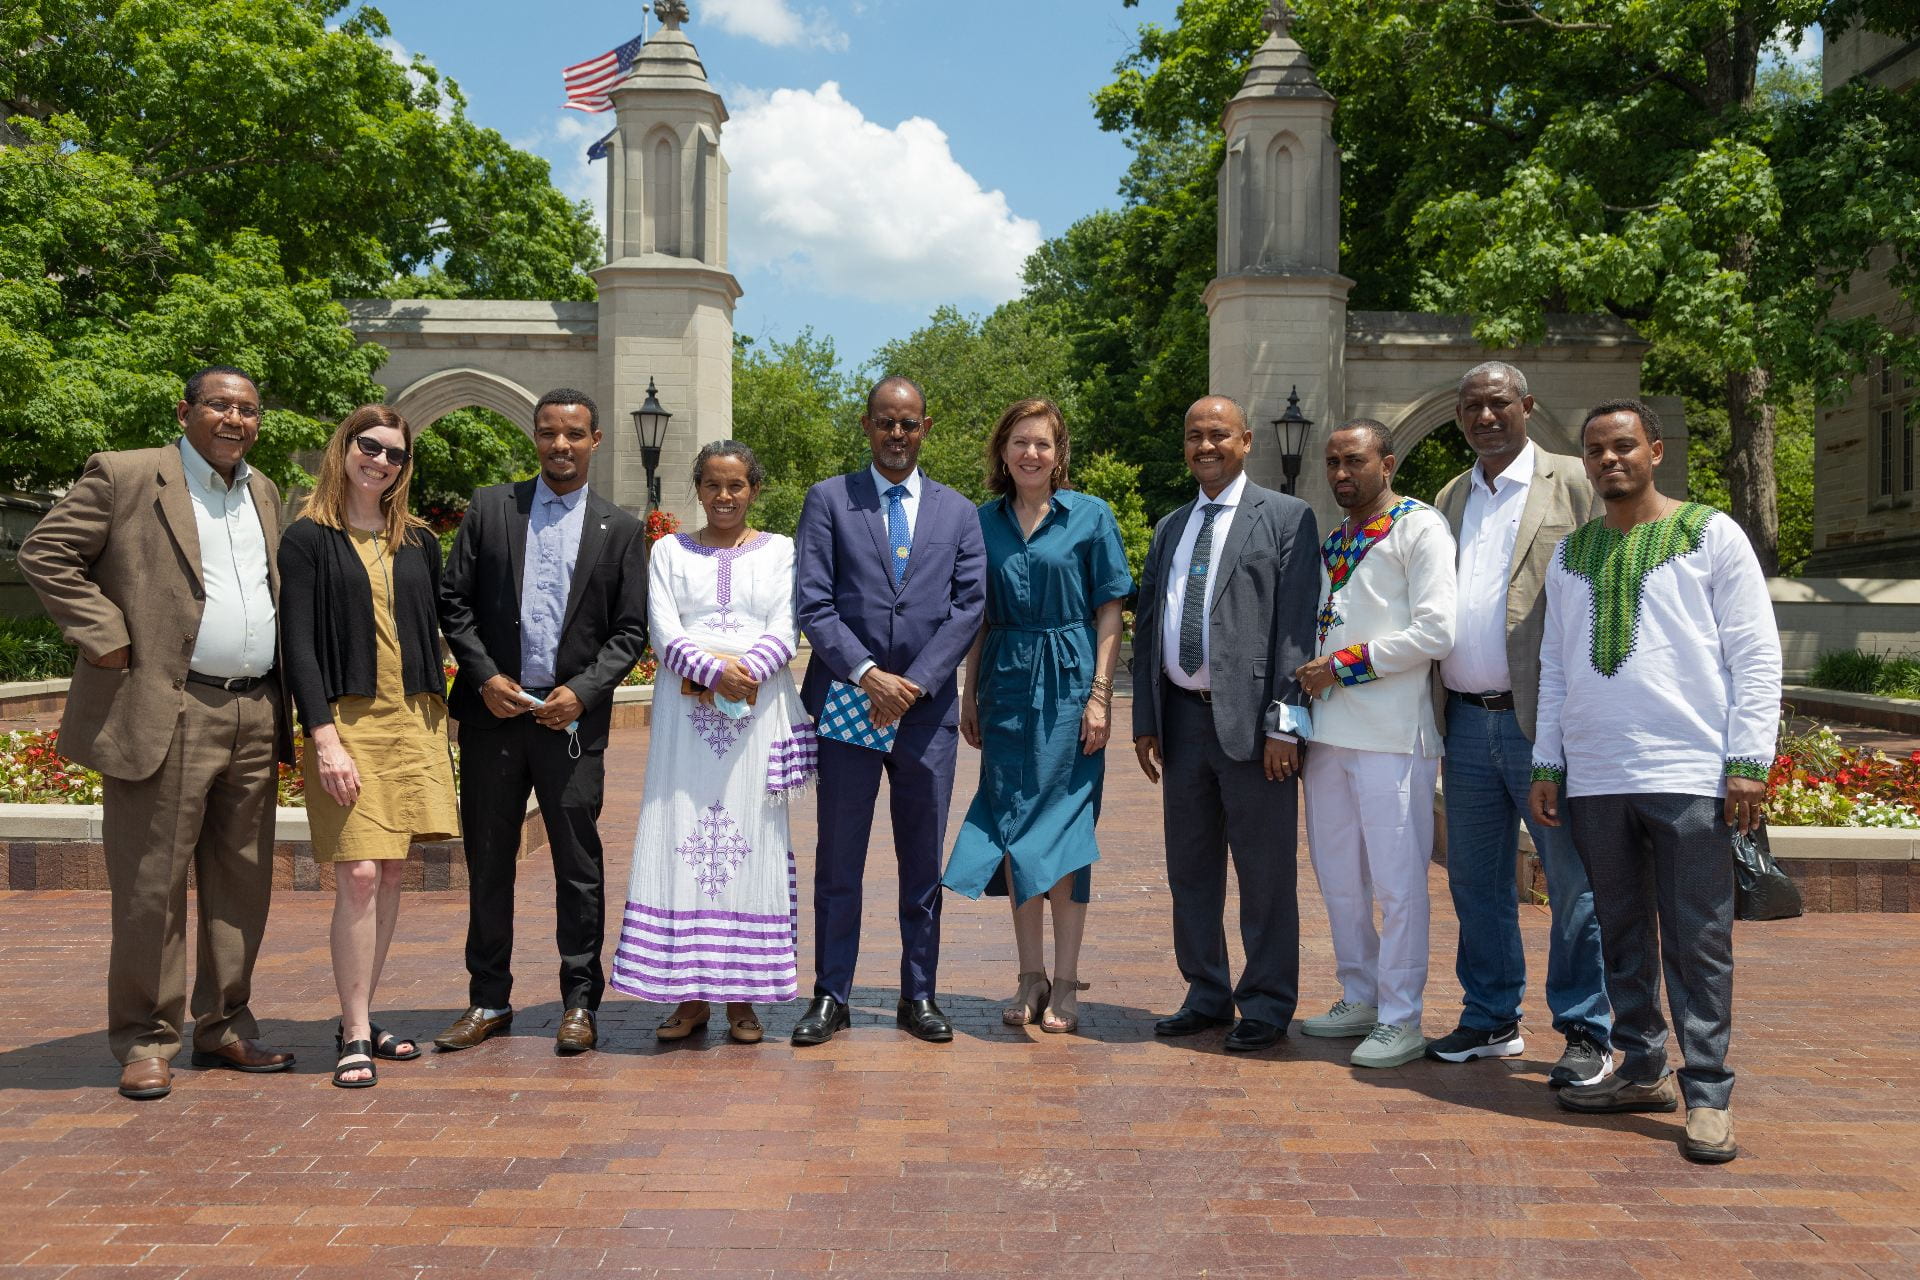 Indiana University and Ethiopian university leaders in front of the Sample Gates